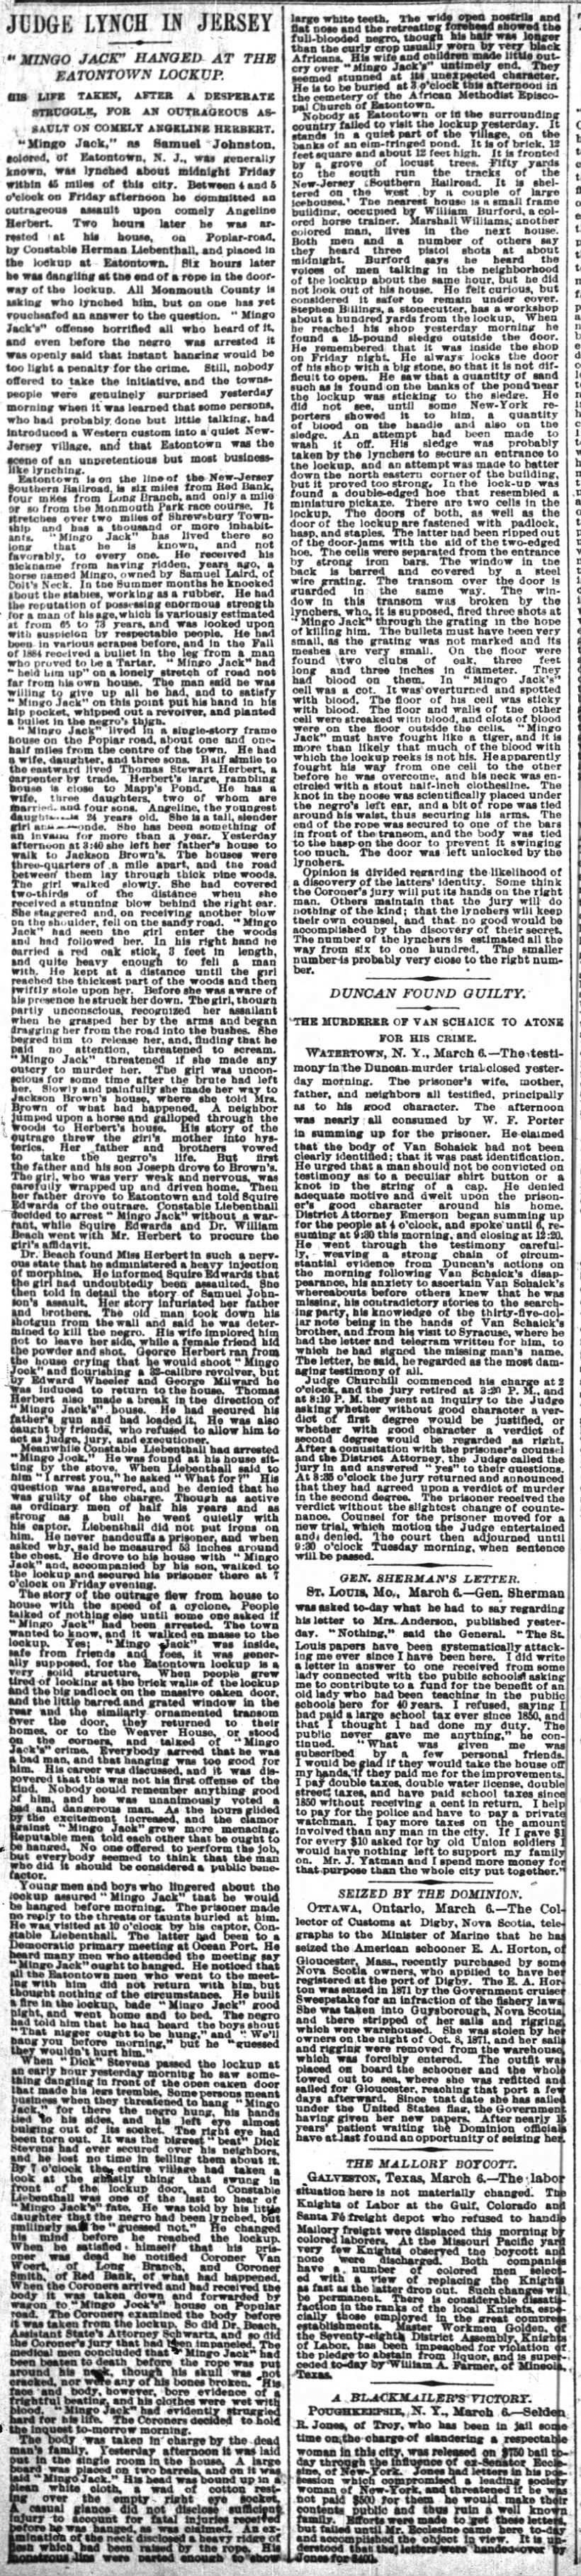 NYT article about lynching of Mingo Jack March 7, 1886